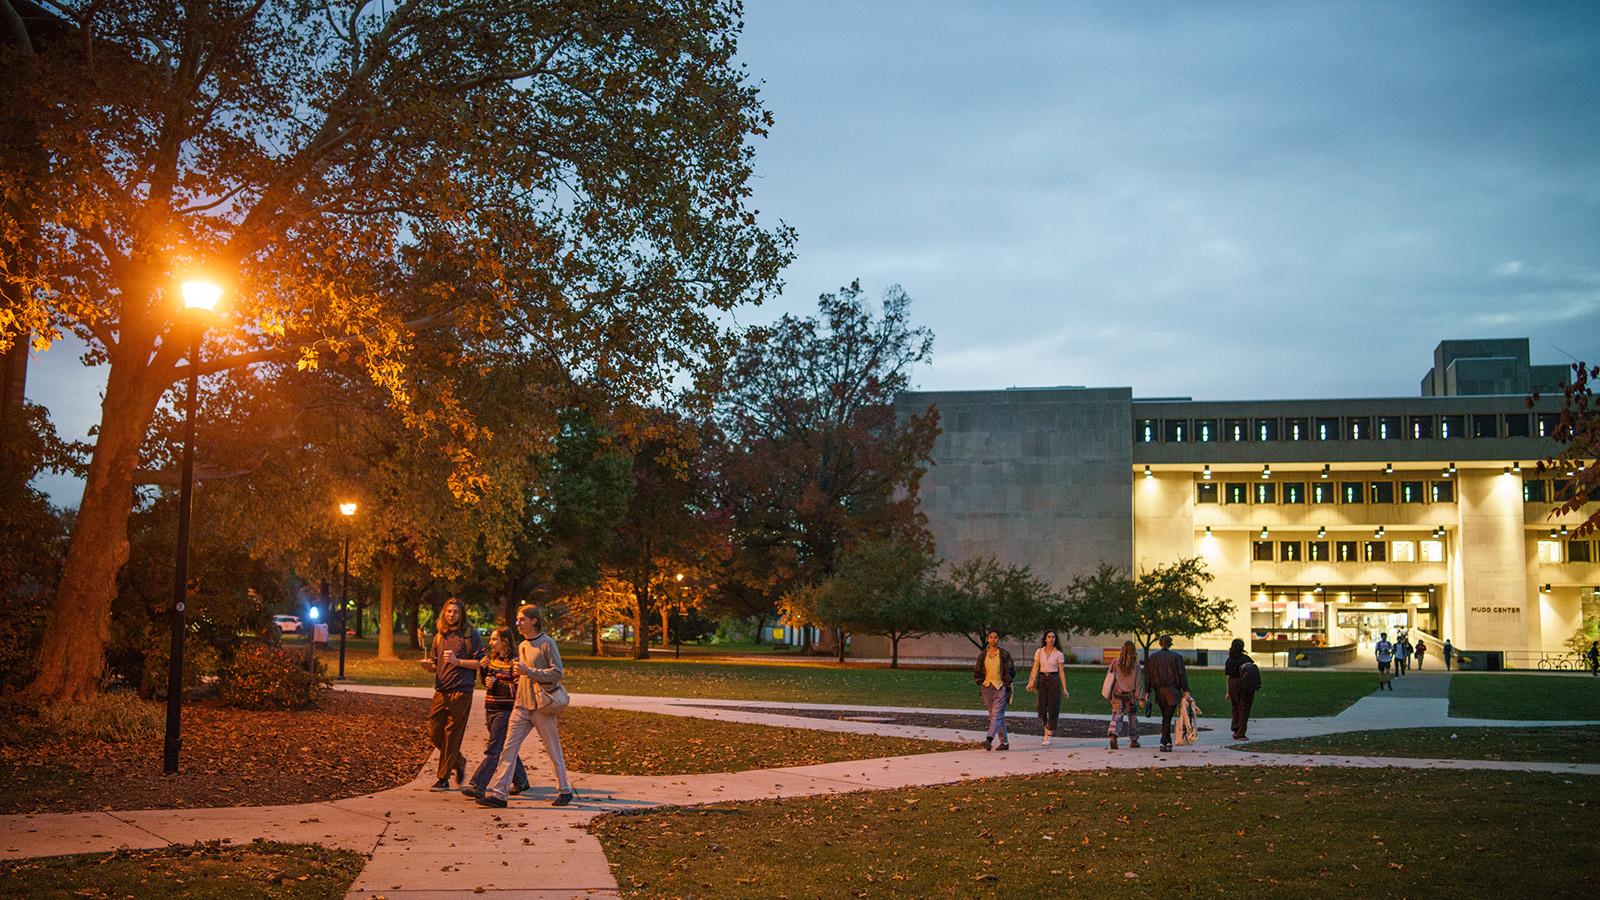 A campus quad at dusk. Students walk along a path in front of an illuminated building.